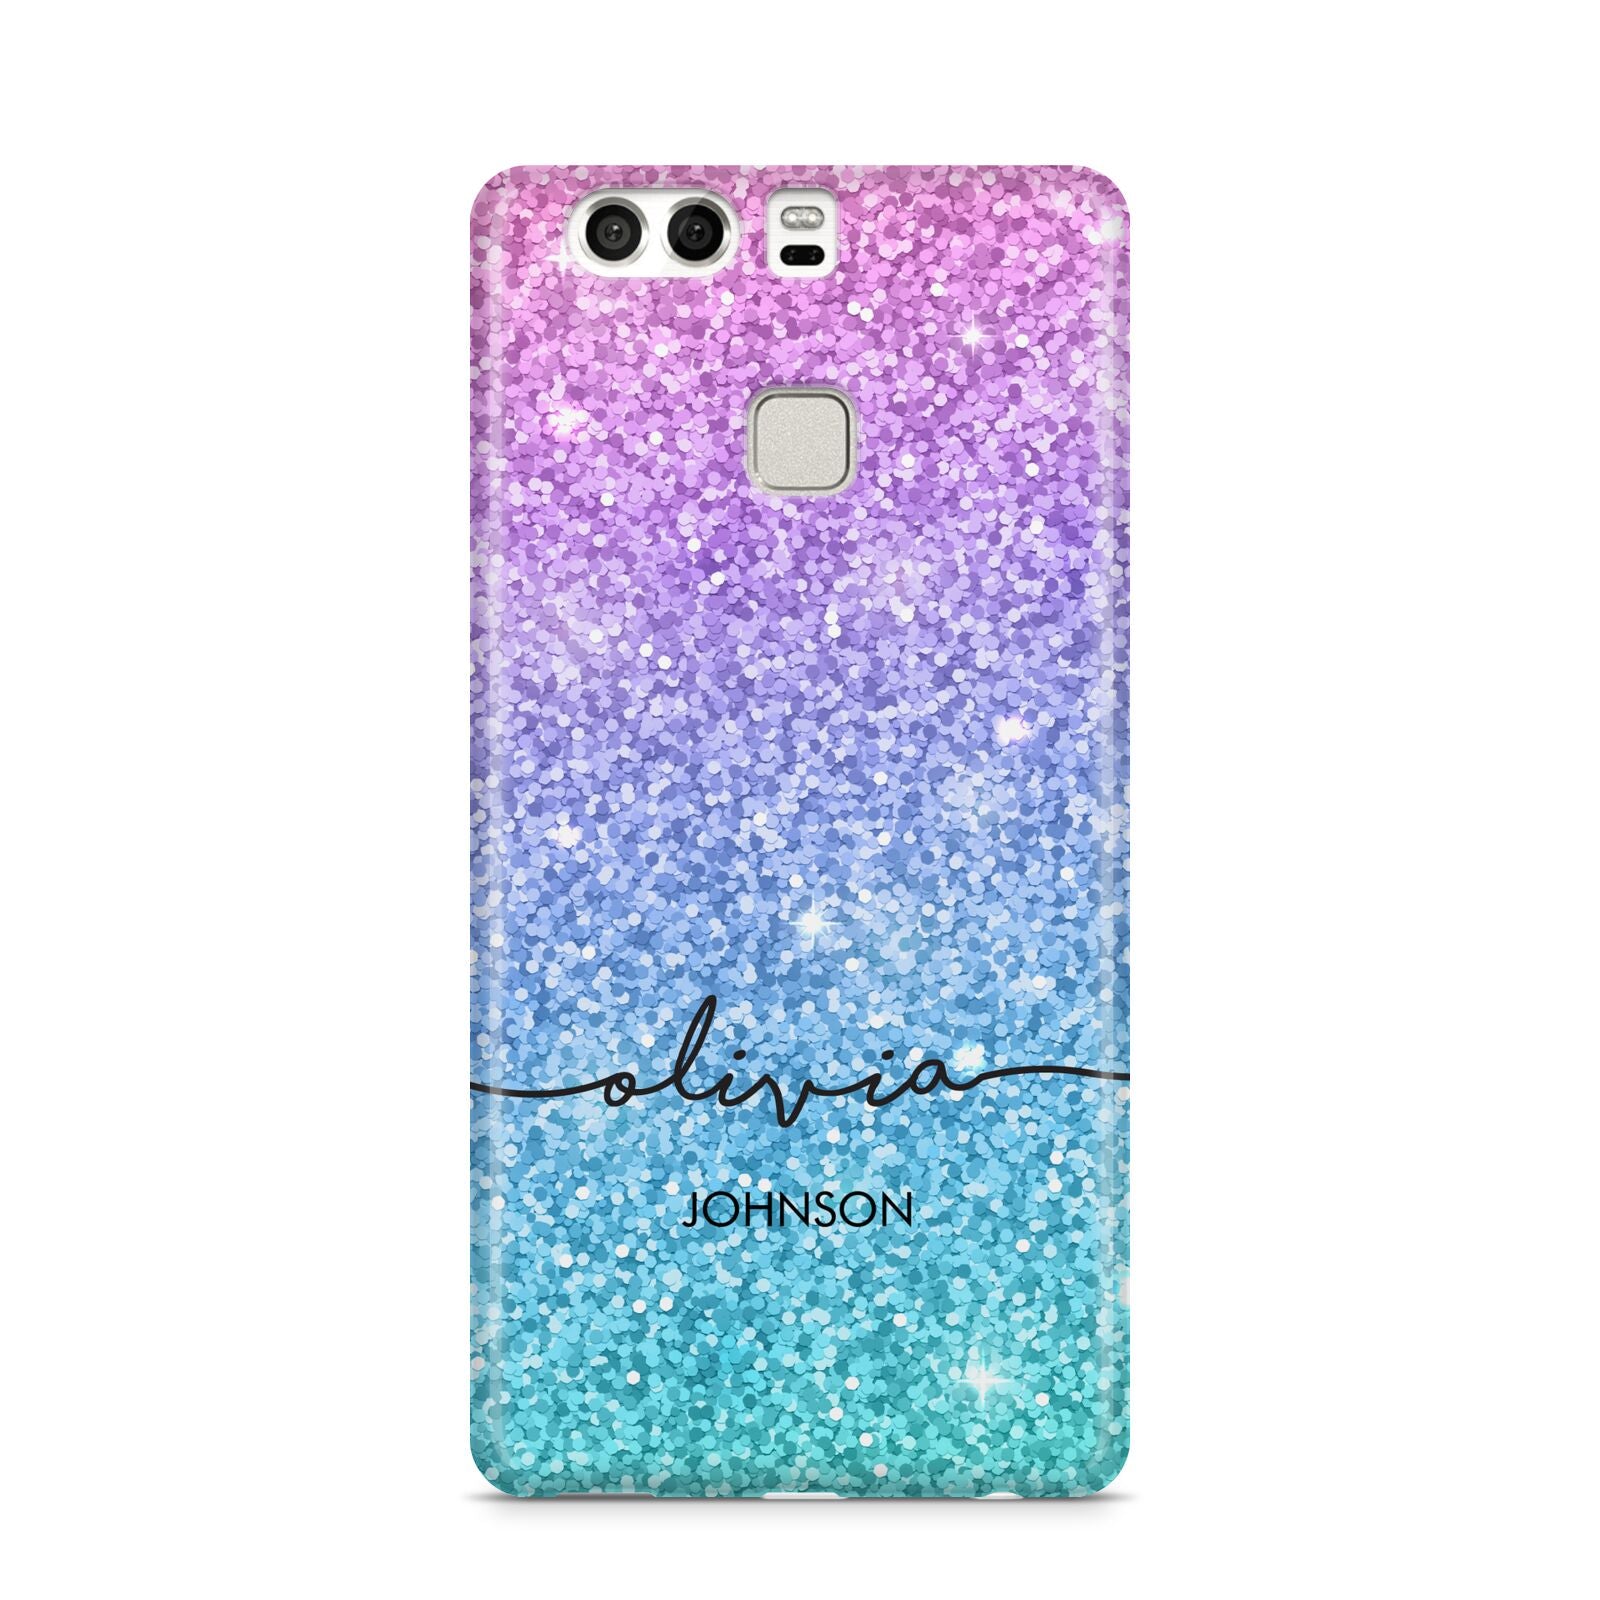 Personalised Ombre Glitter with Names Huawei P9 Case